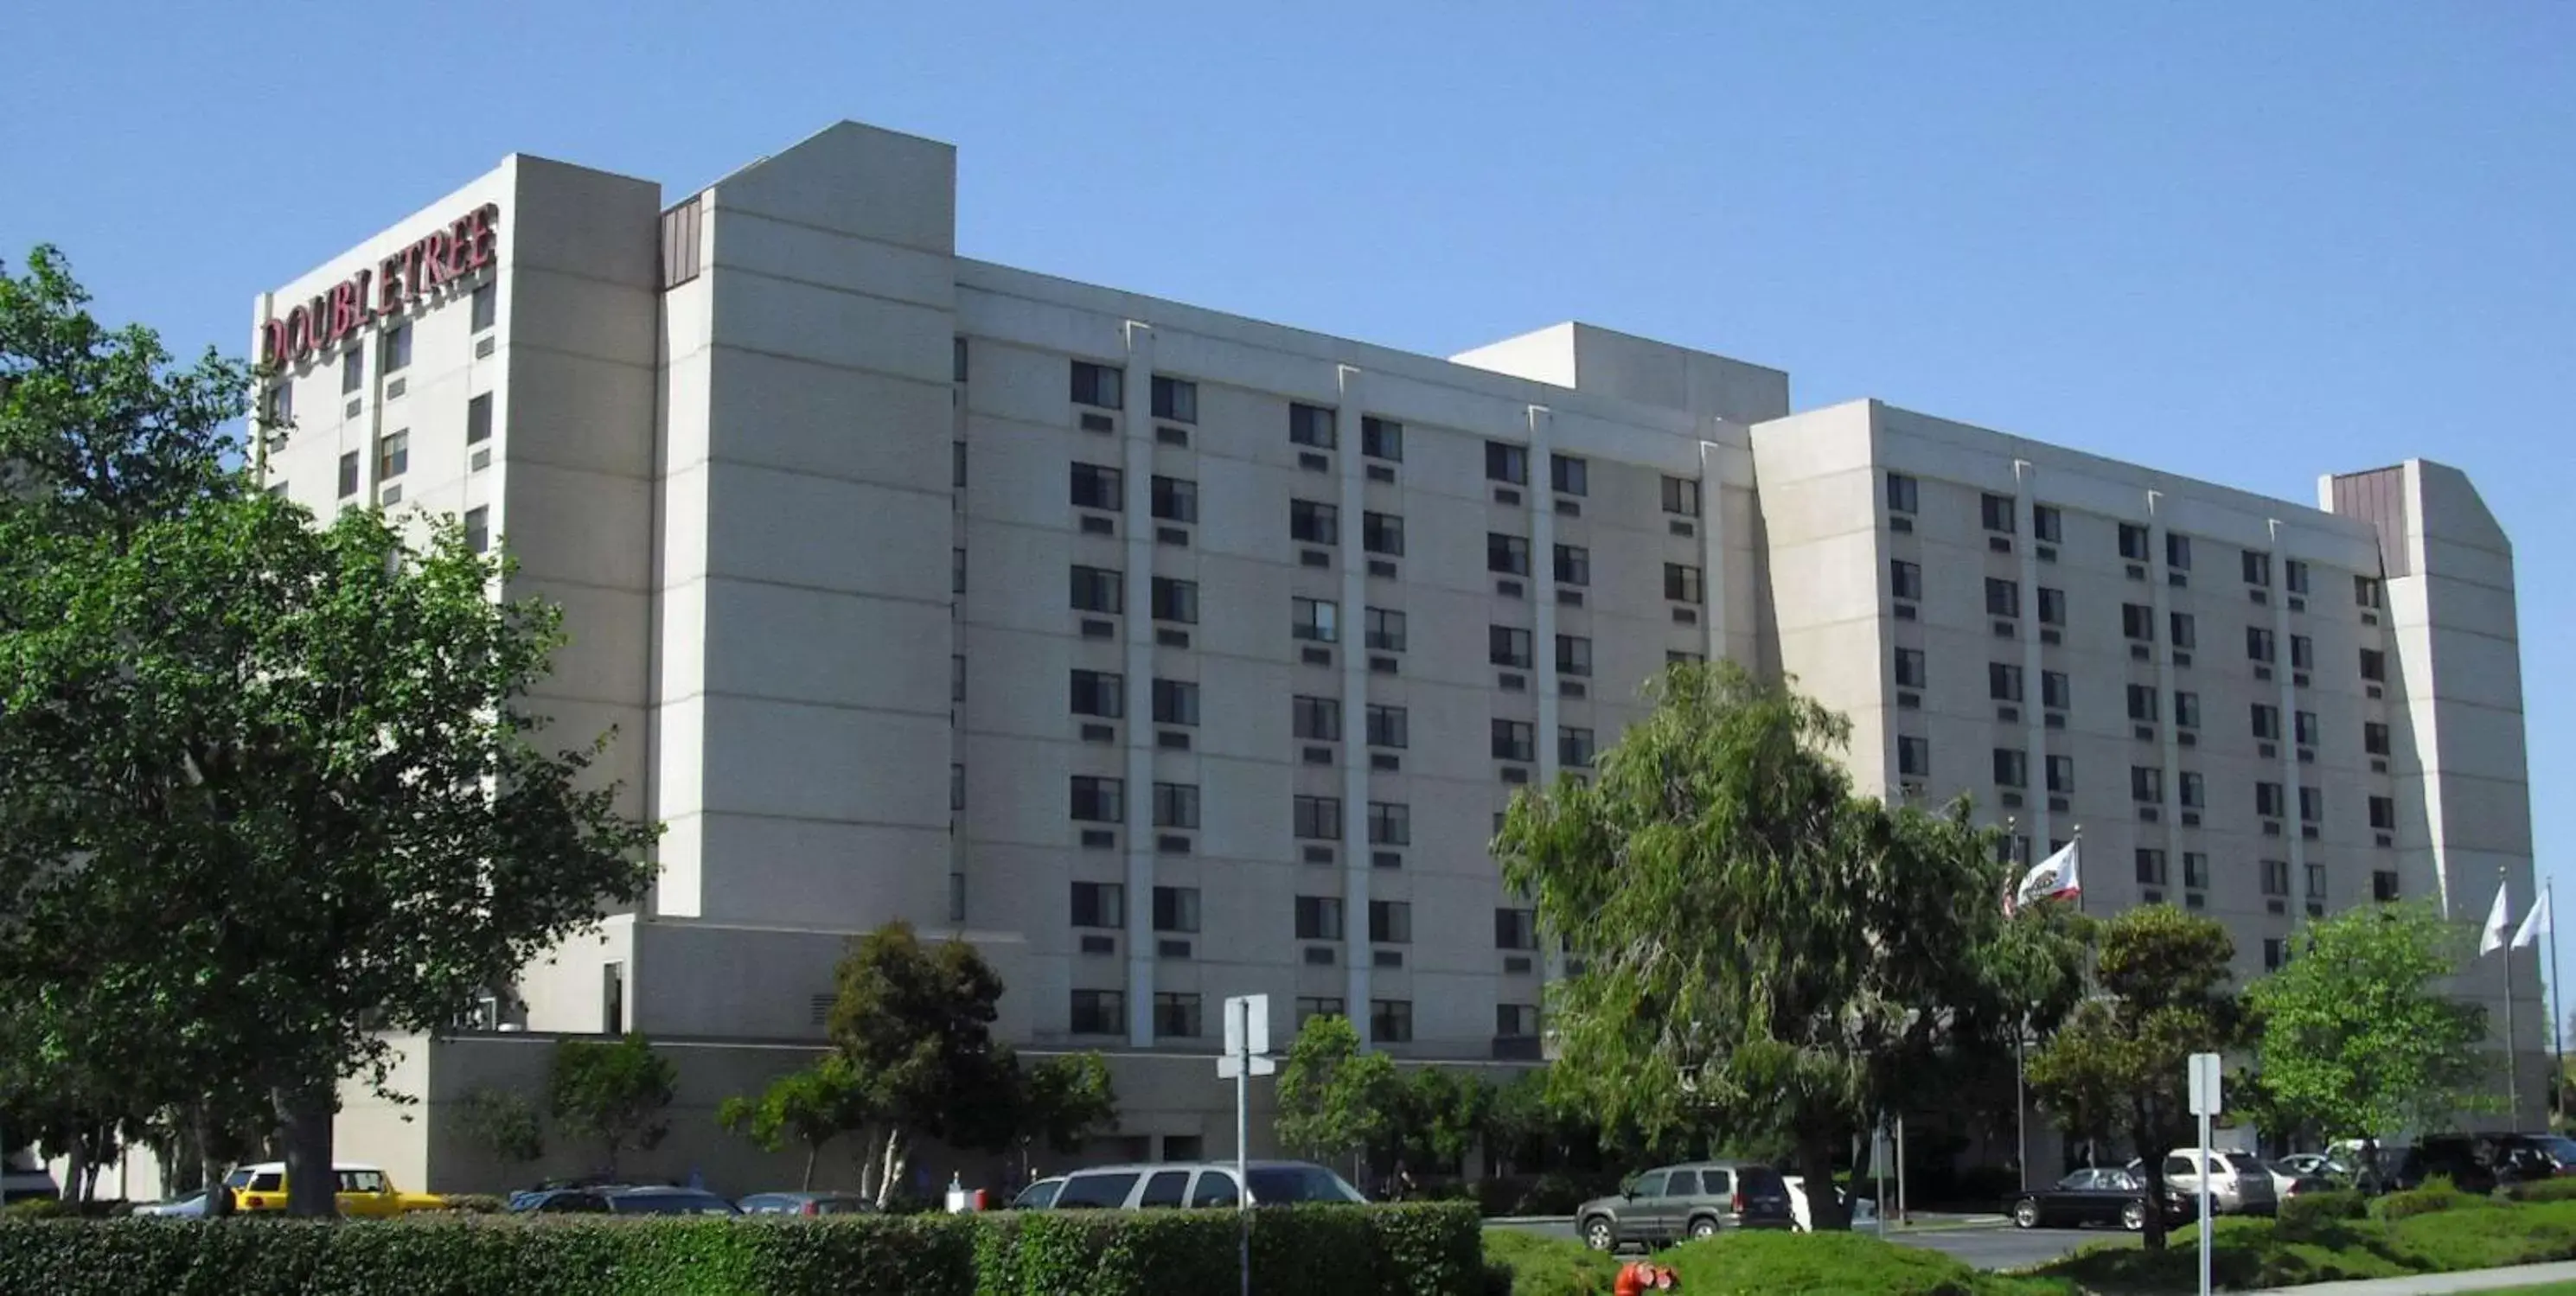 Property Building in DoubleTree by Hilton San Francisco Airport